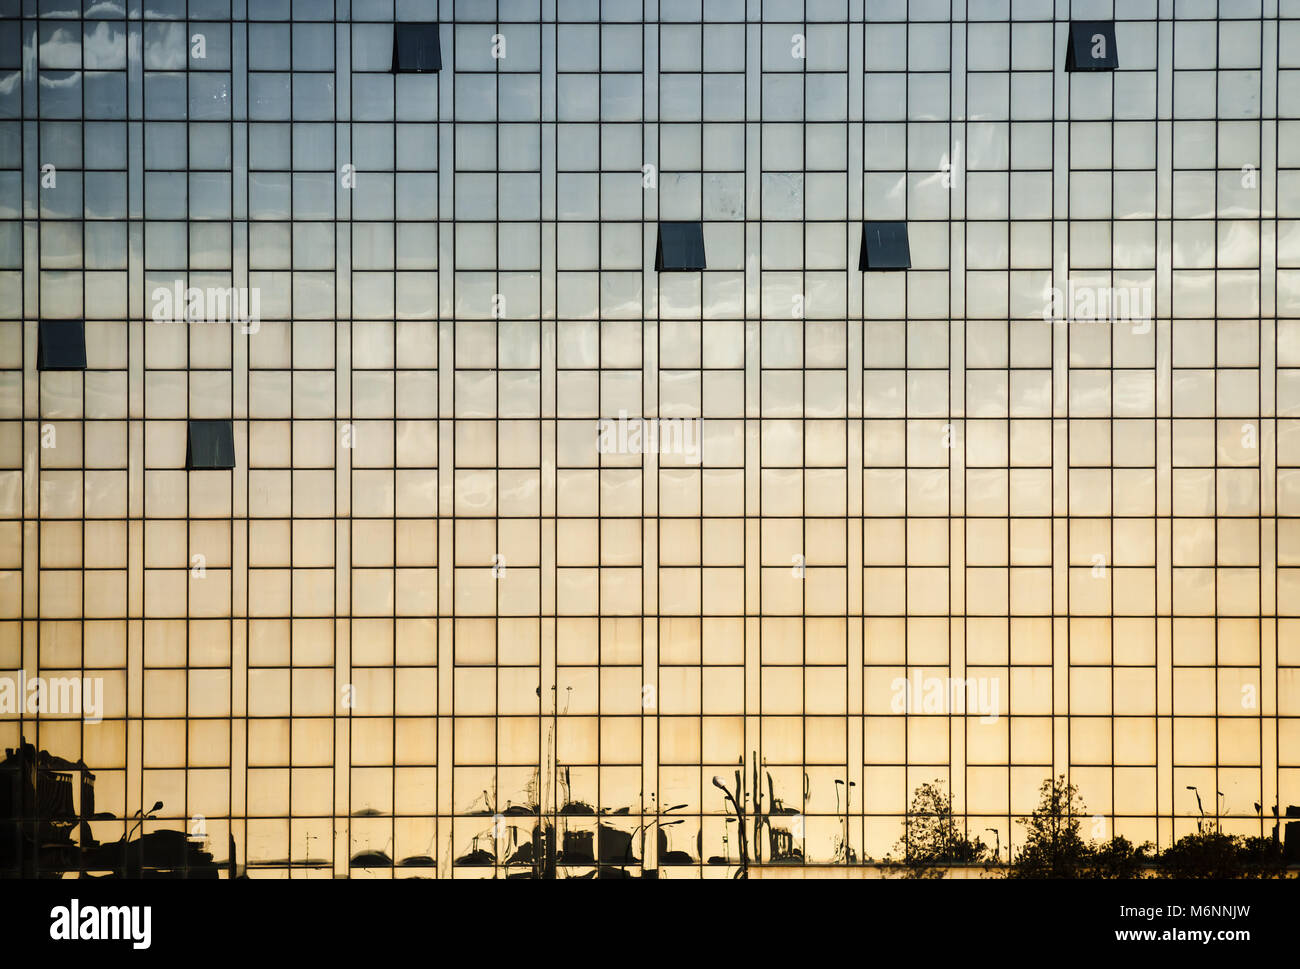 Modern office building wall made of glass with open windows and reflections, abstract background photo texture Stock Photo